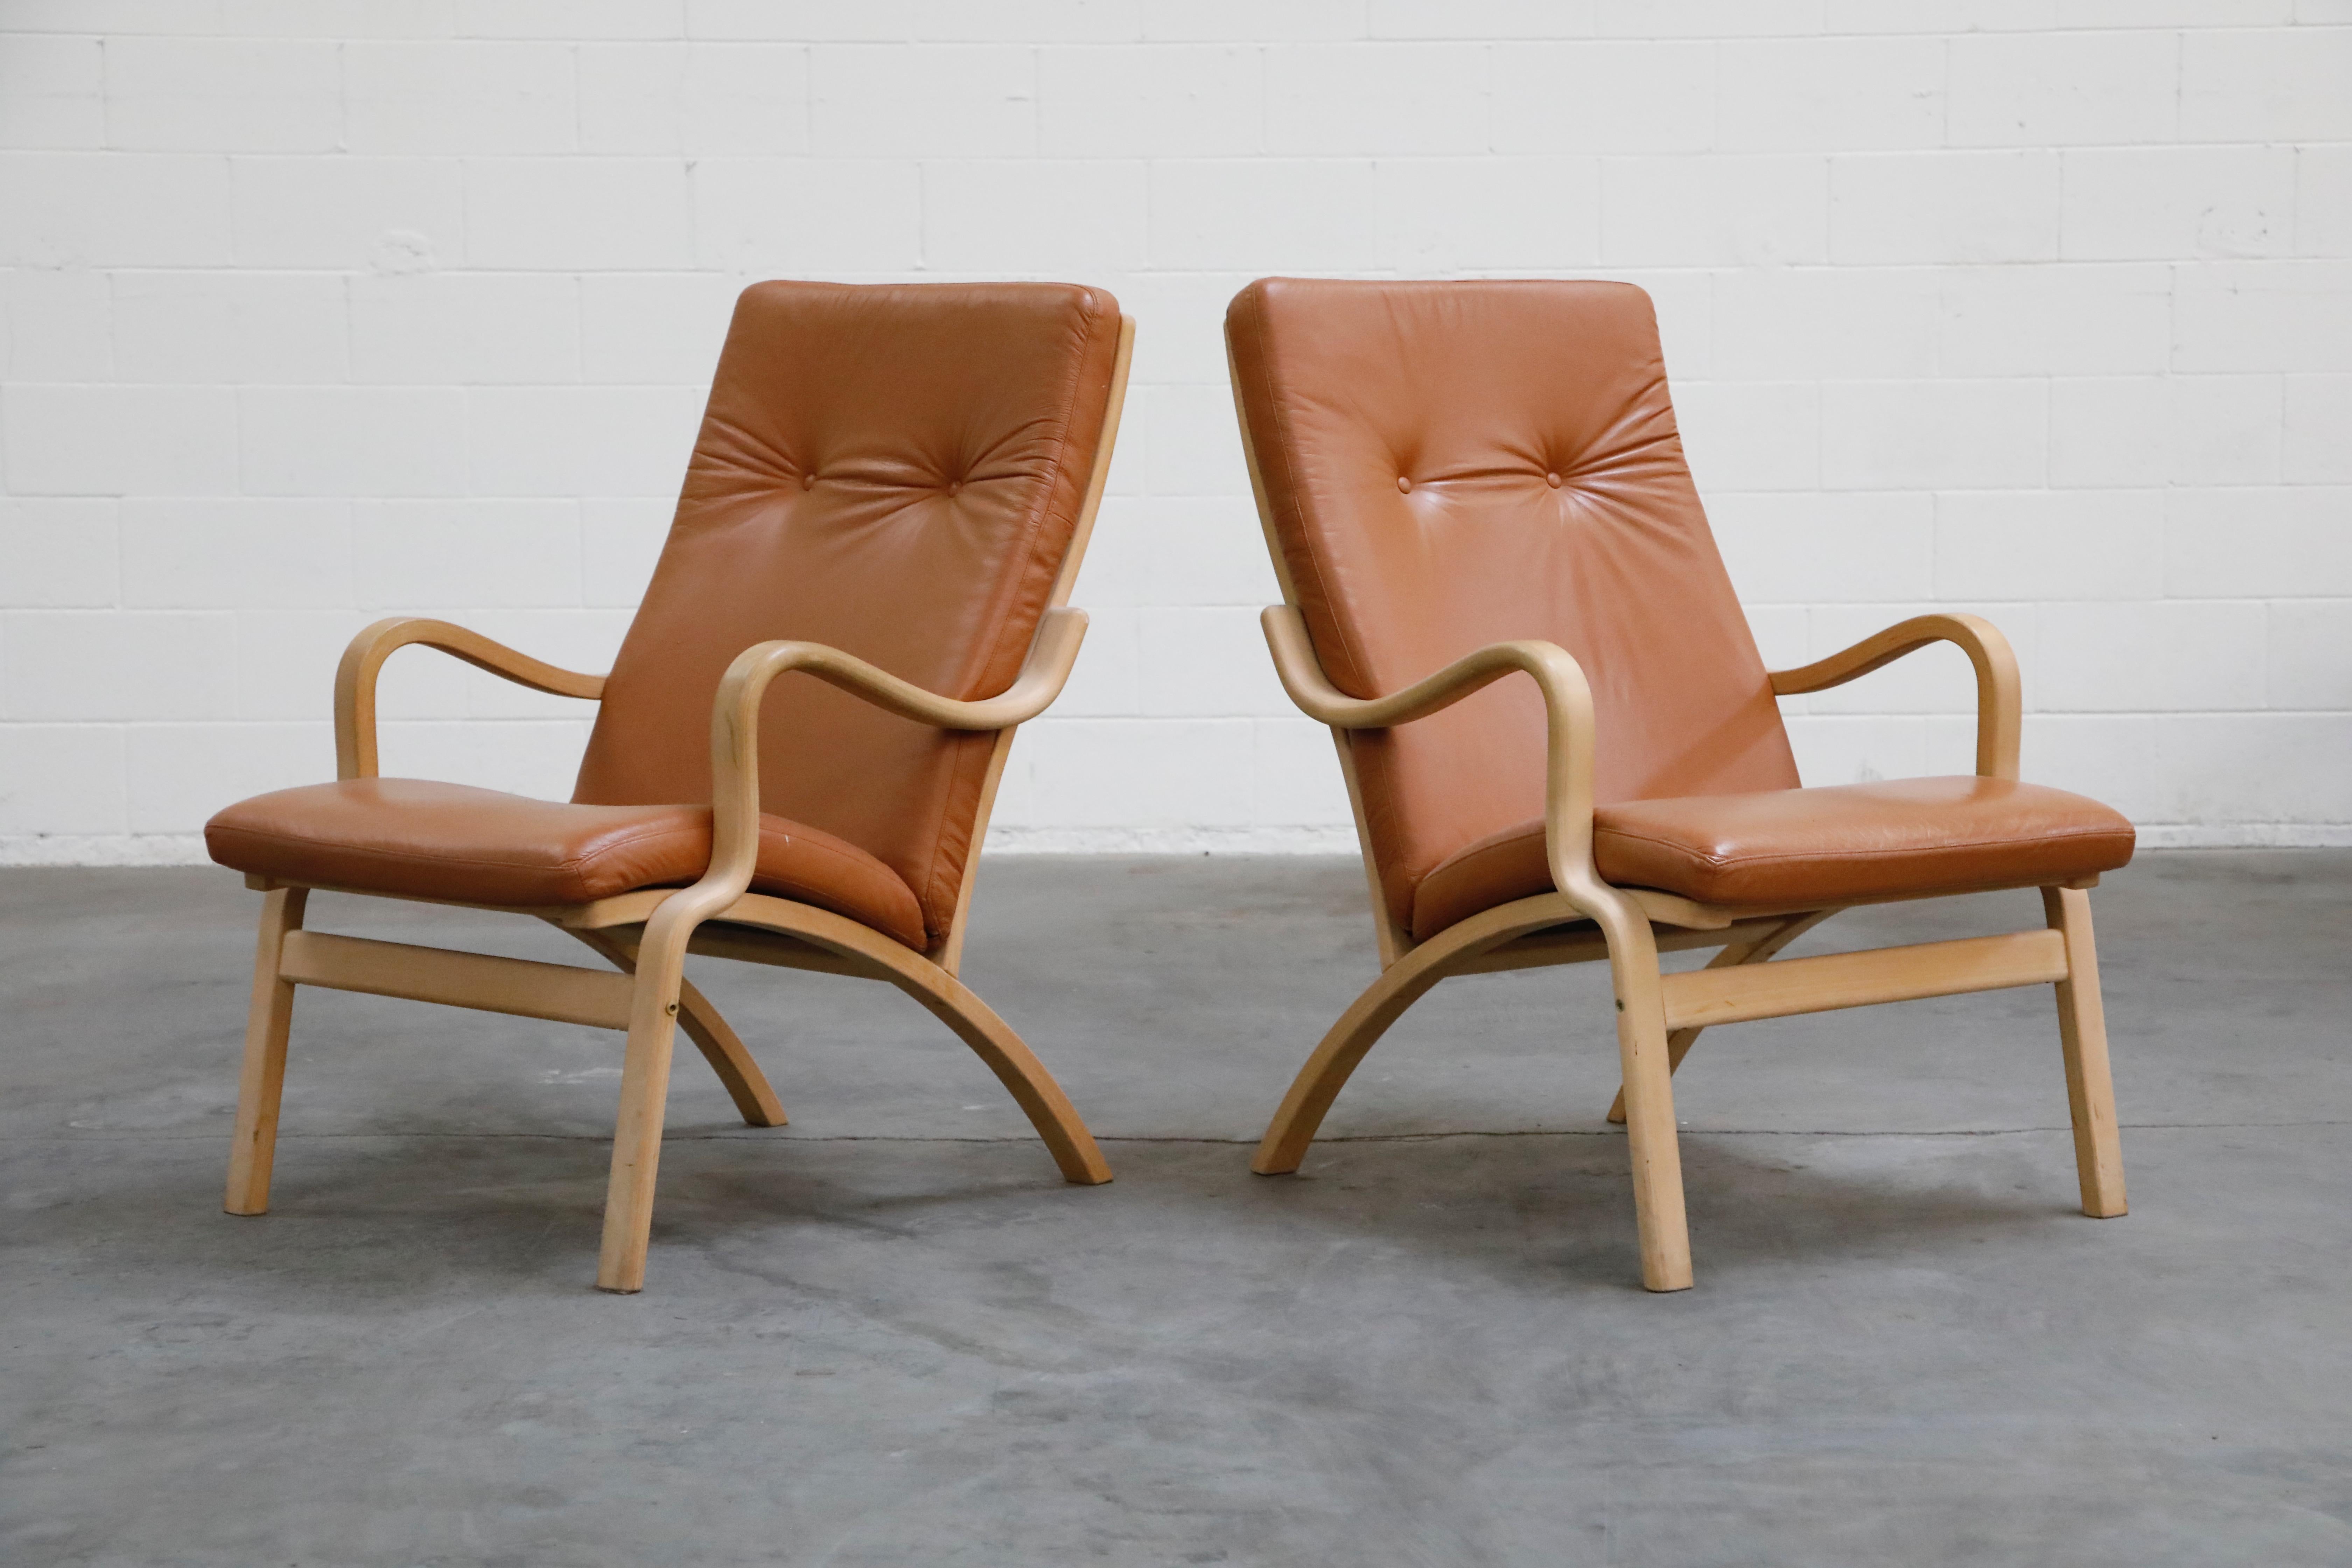 A nice set of two (2) Scandinavian Bentwood leather lounge chairs and one (1) ottoman, priced as a set. Nicely sculpted birch frames with curvaceous arms and brown leather cushions. Well made, great quality materials and craftsmanship, very good